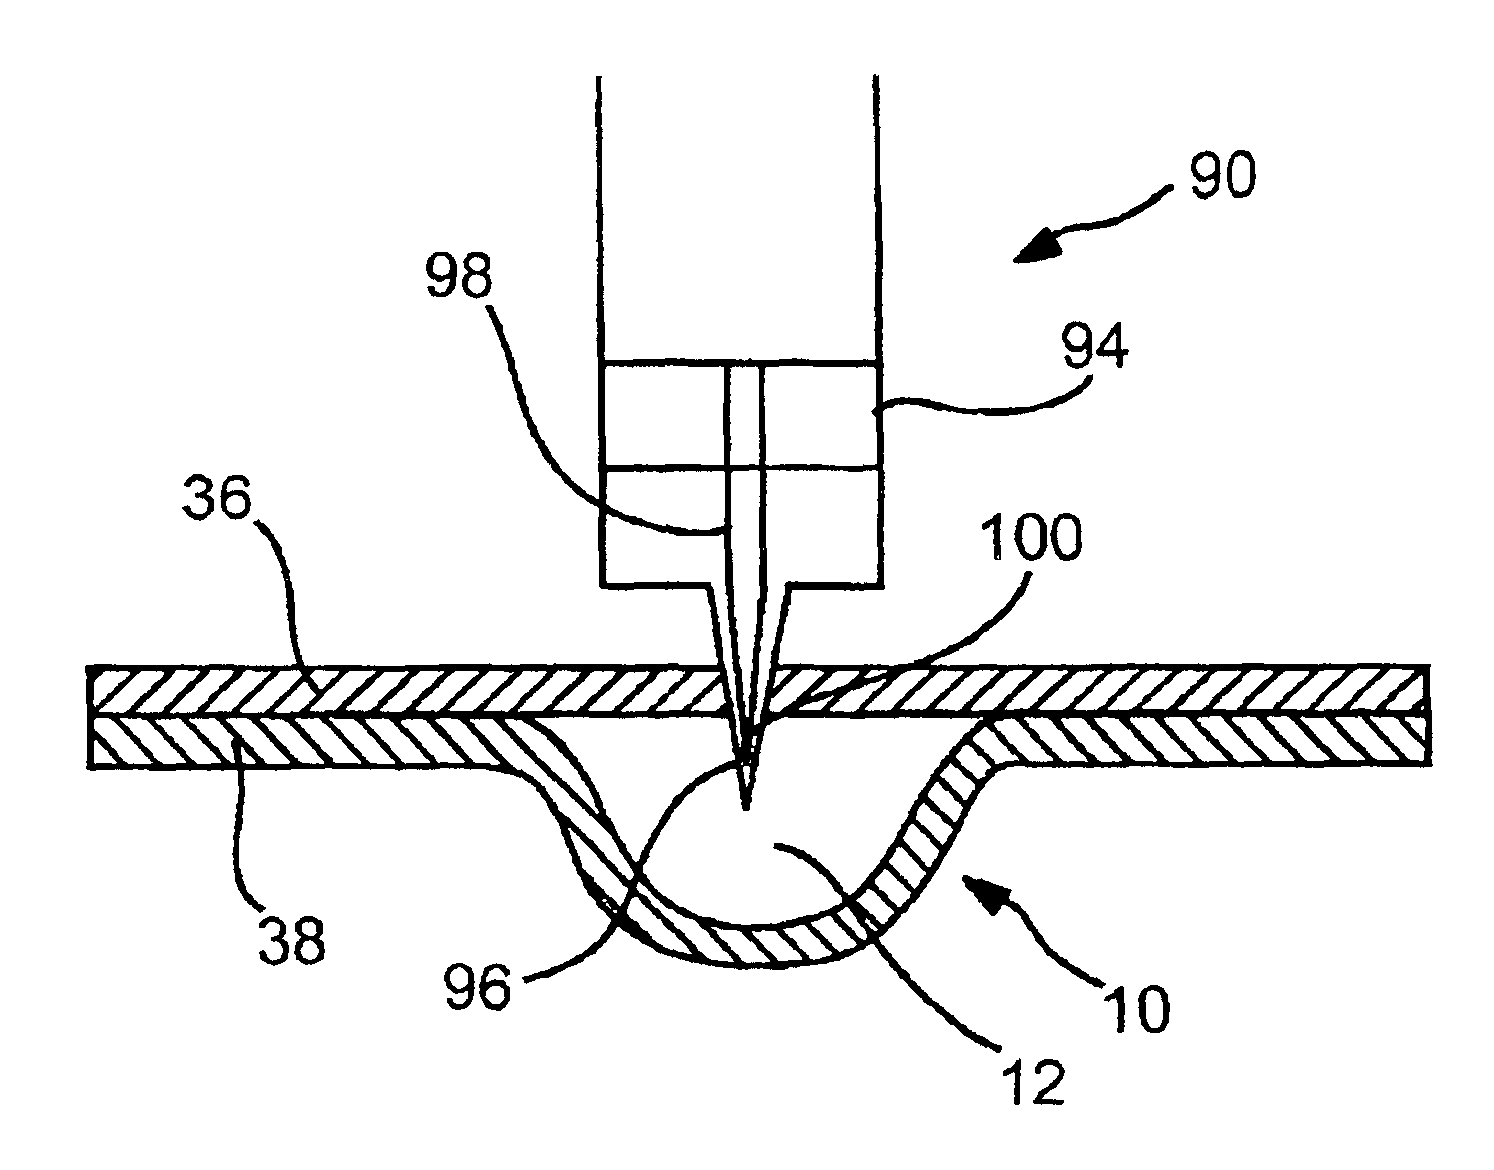 Devices, systems and methods for the containment and use of liquid solutions